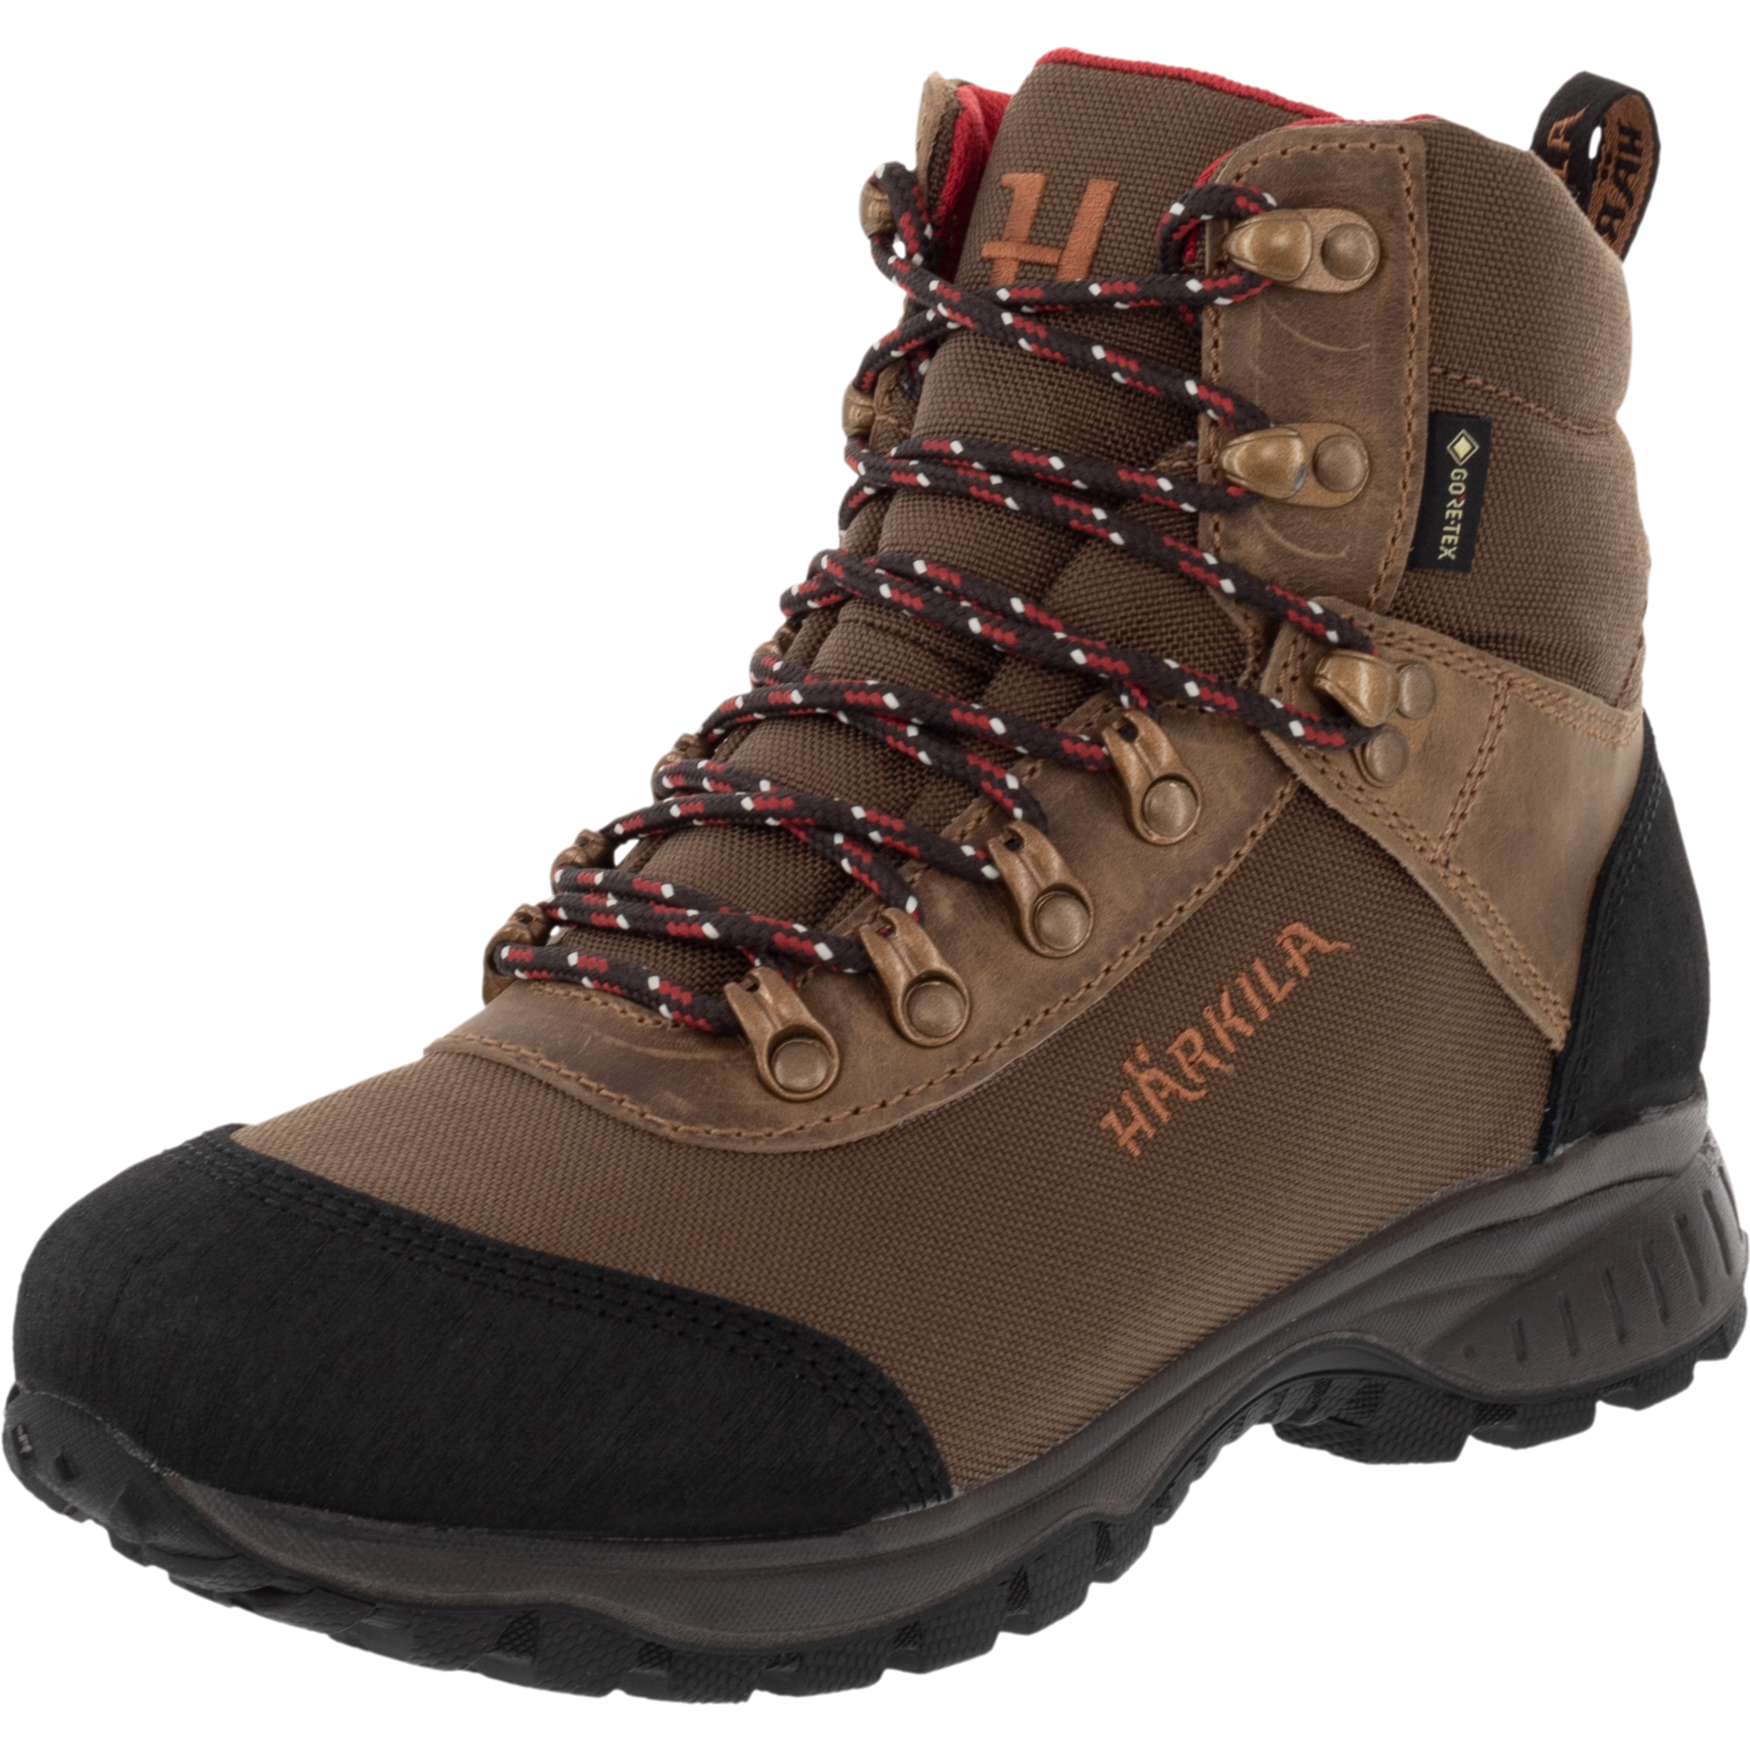 Wildwood 2.0 GTX Hunting Boots for Women